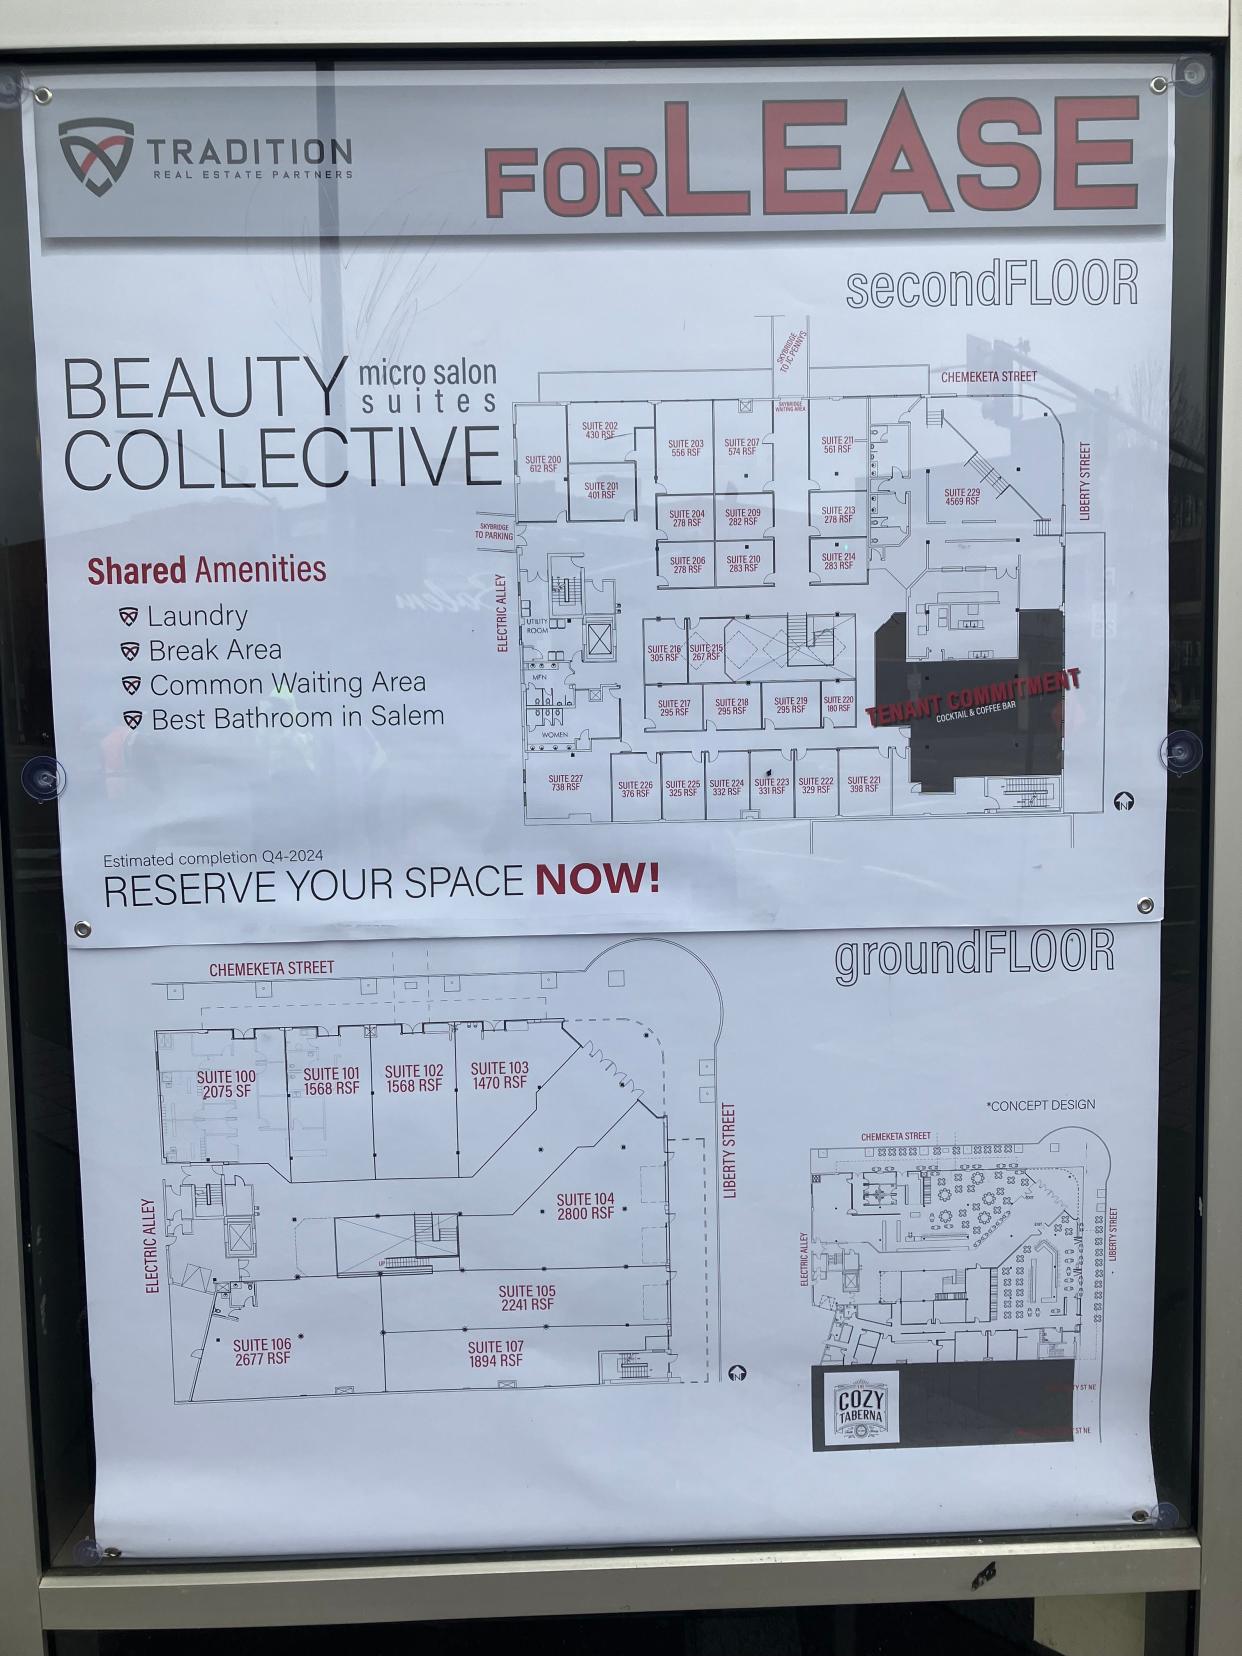 Floor plans for the Forge, the building previously known as Liberty Plaza, show a second floor beauty collective micro-salon space and a first floor of possible retail, restaurant and cafe spots for lease.